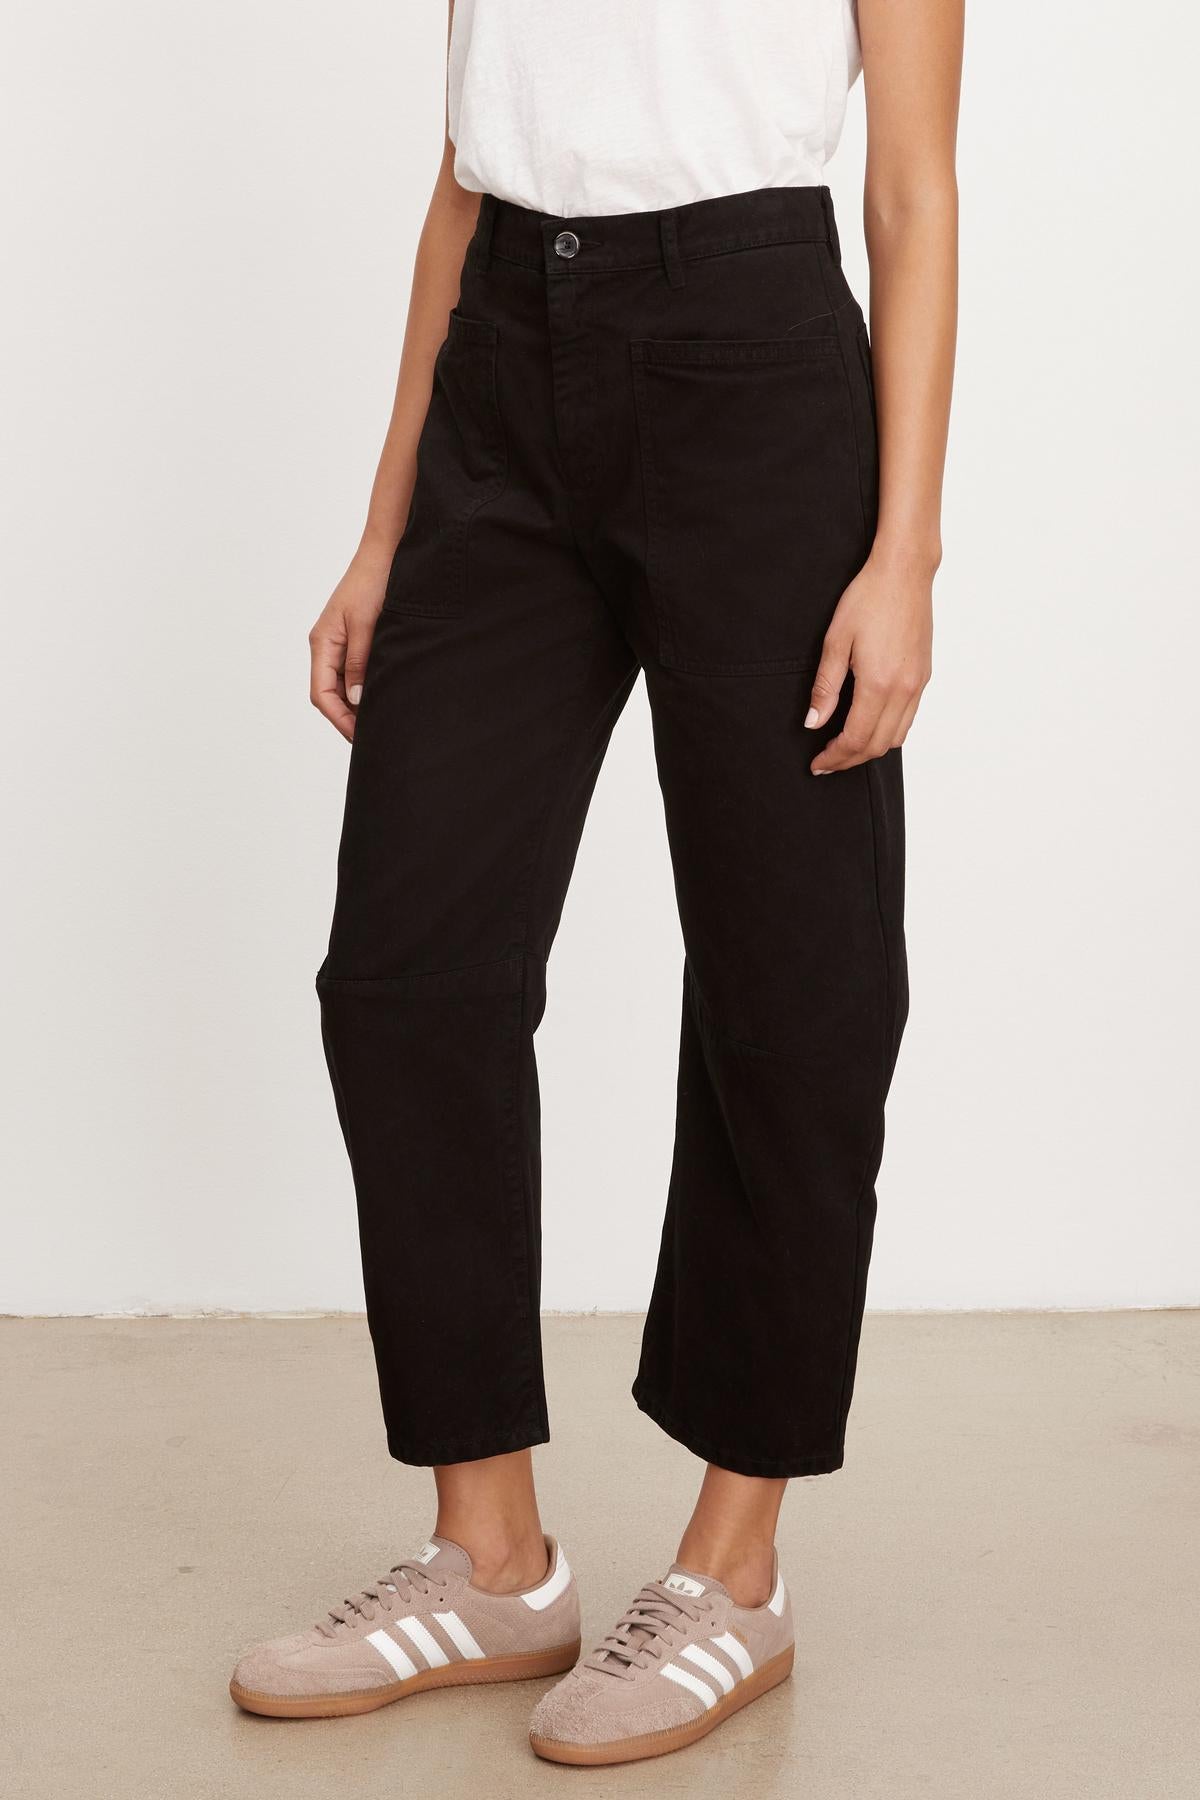 Easy Vintage Pant Options for Spring • The Page Edit